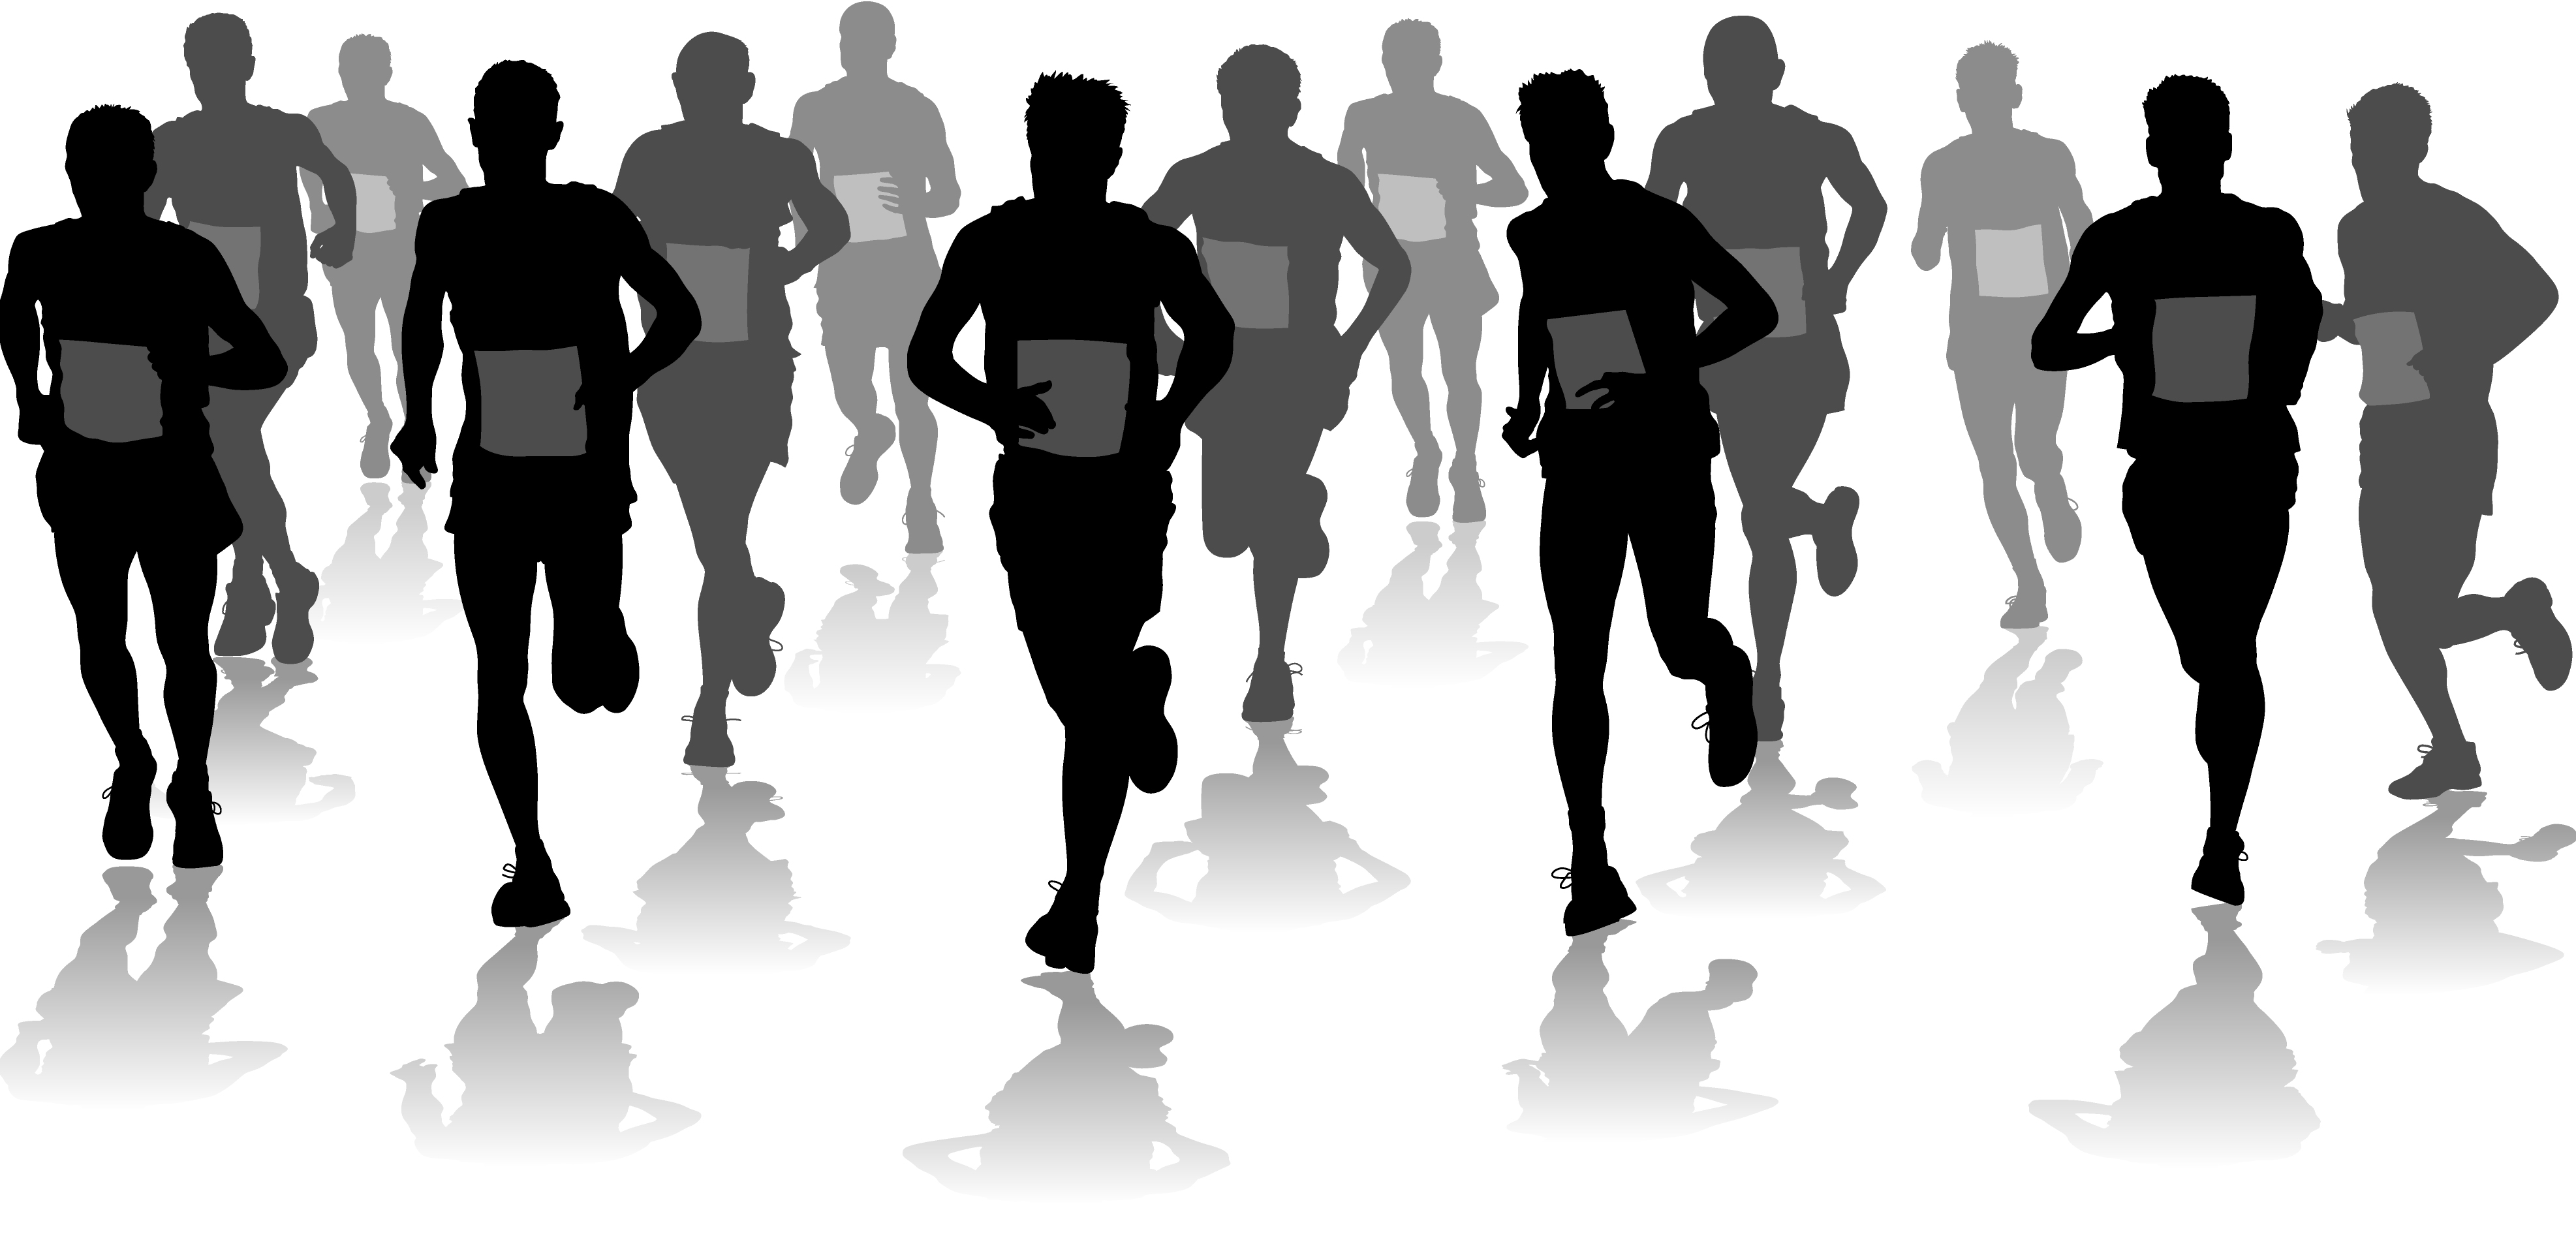 Runners in silhouette